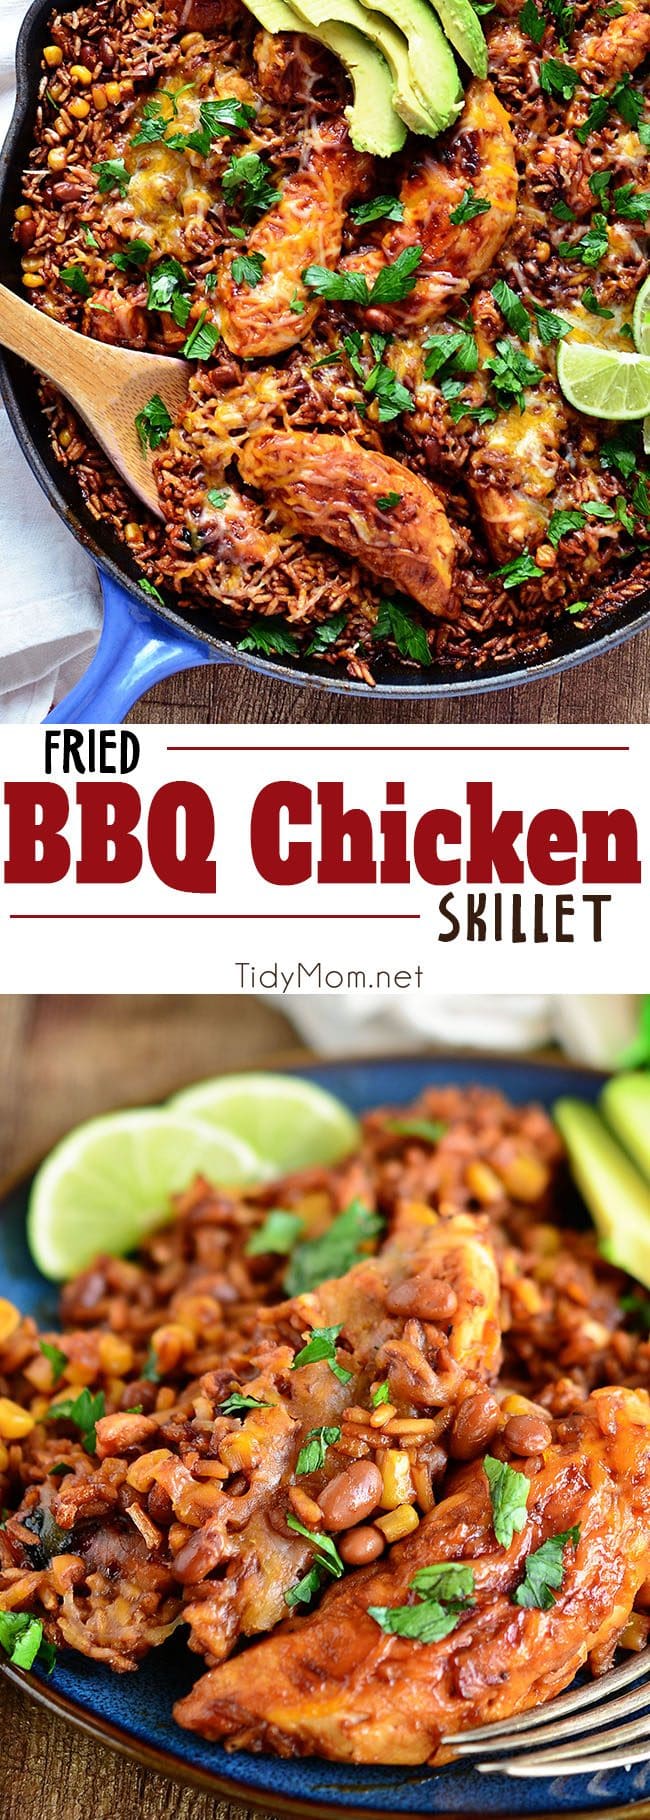 Fried BBQ Chicken Skillet dinner blends barbecue sauce, chicken, baked beans, corn and rice to create a satisfying meal that’s ready in 30 minutes. Set with a cozy dinner table and playlist and it's the perfect, weeknight recipe for families. Find the recipe at Tidymom.net